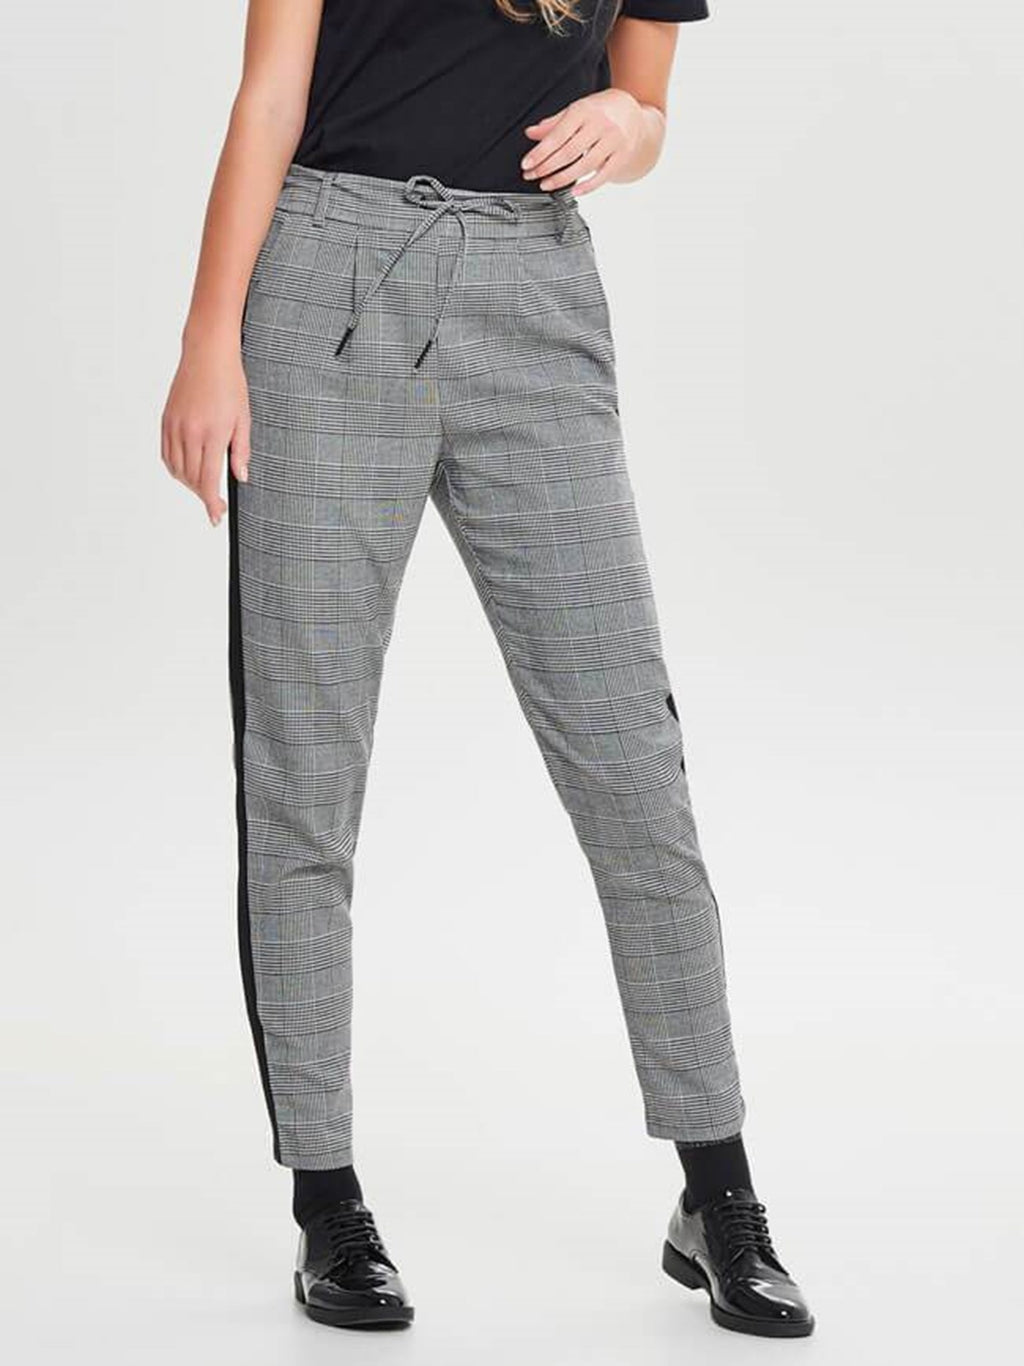 Poptrash Trousers - Checked Black